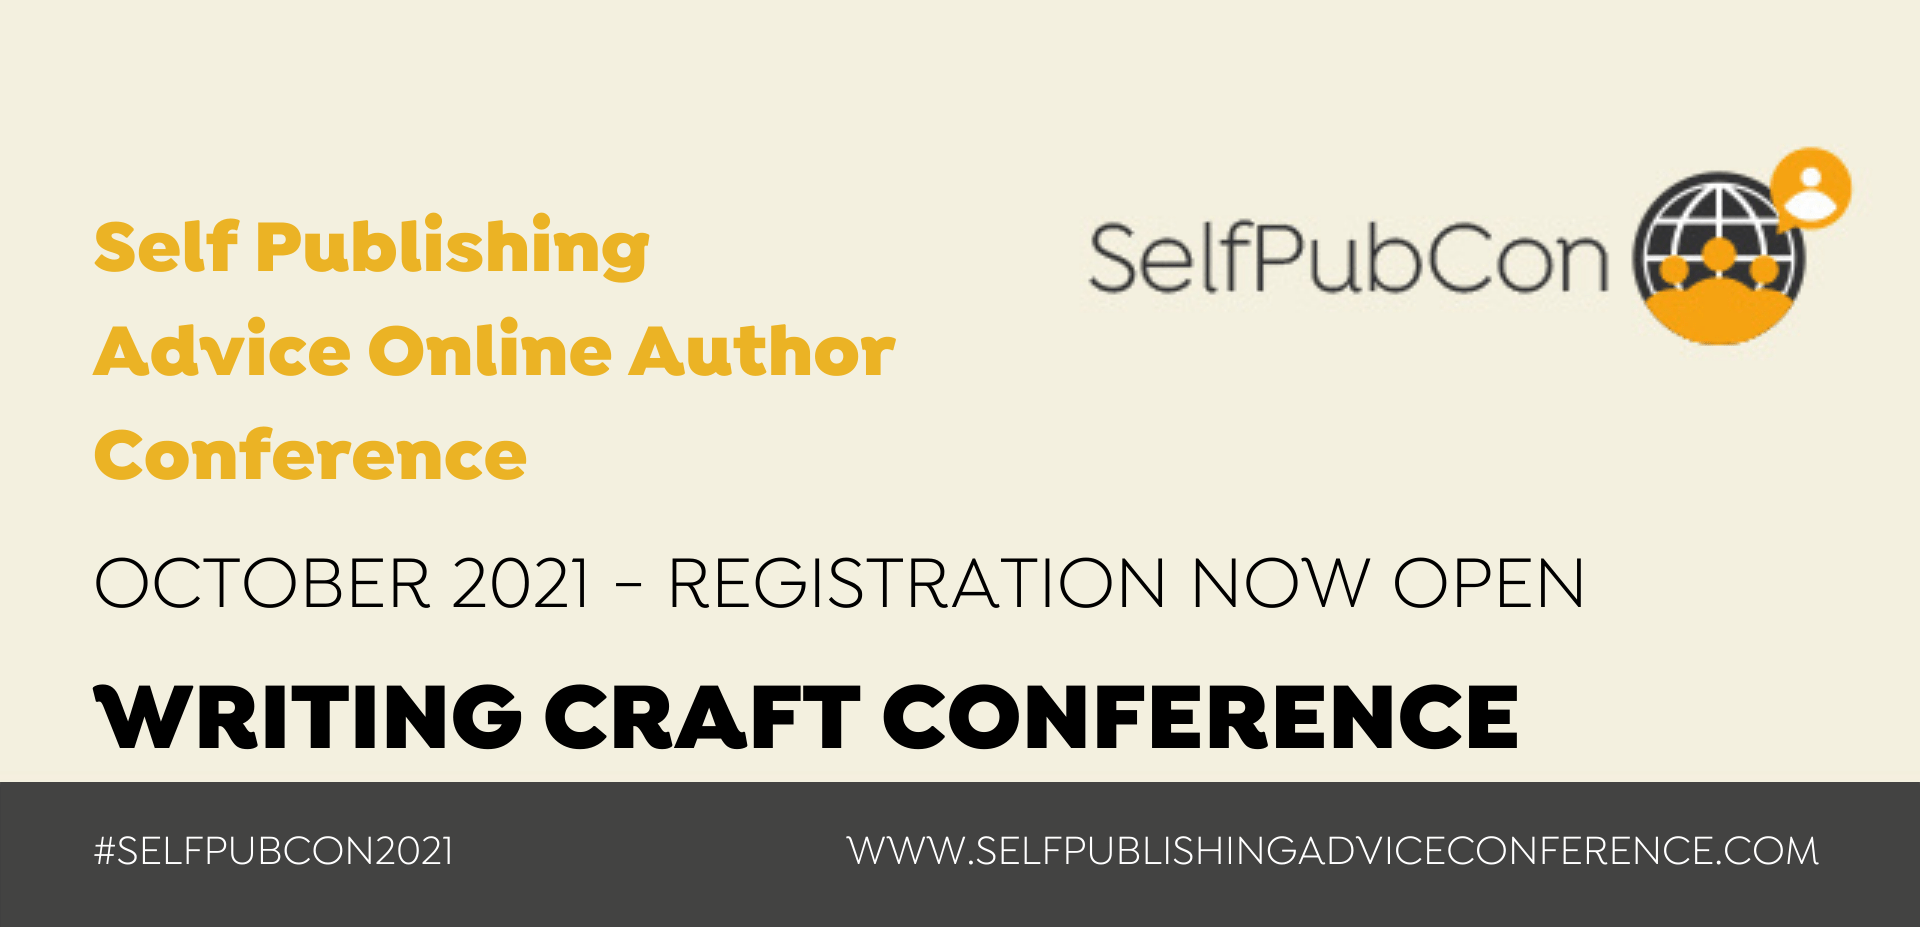 Registration For SelfPubCon: The Writing Craft Conference Is Now Open!